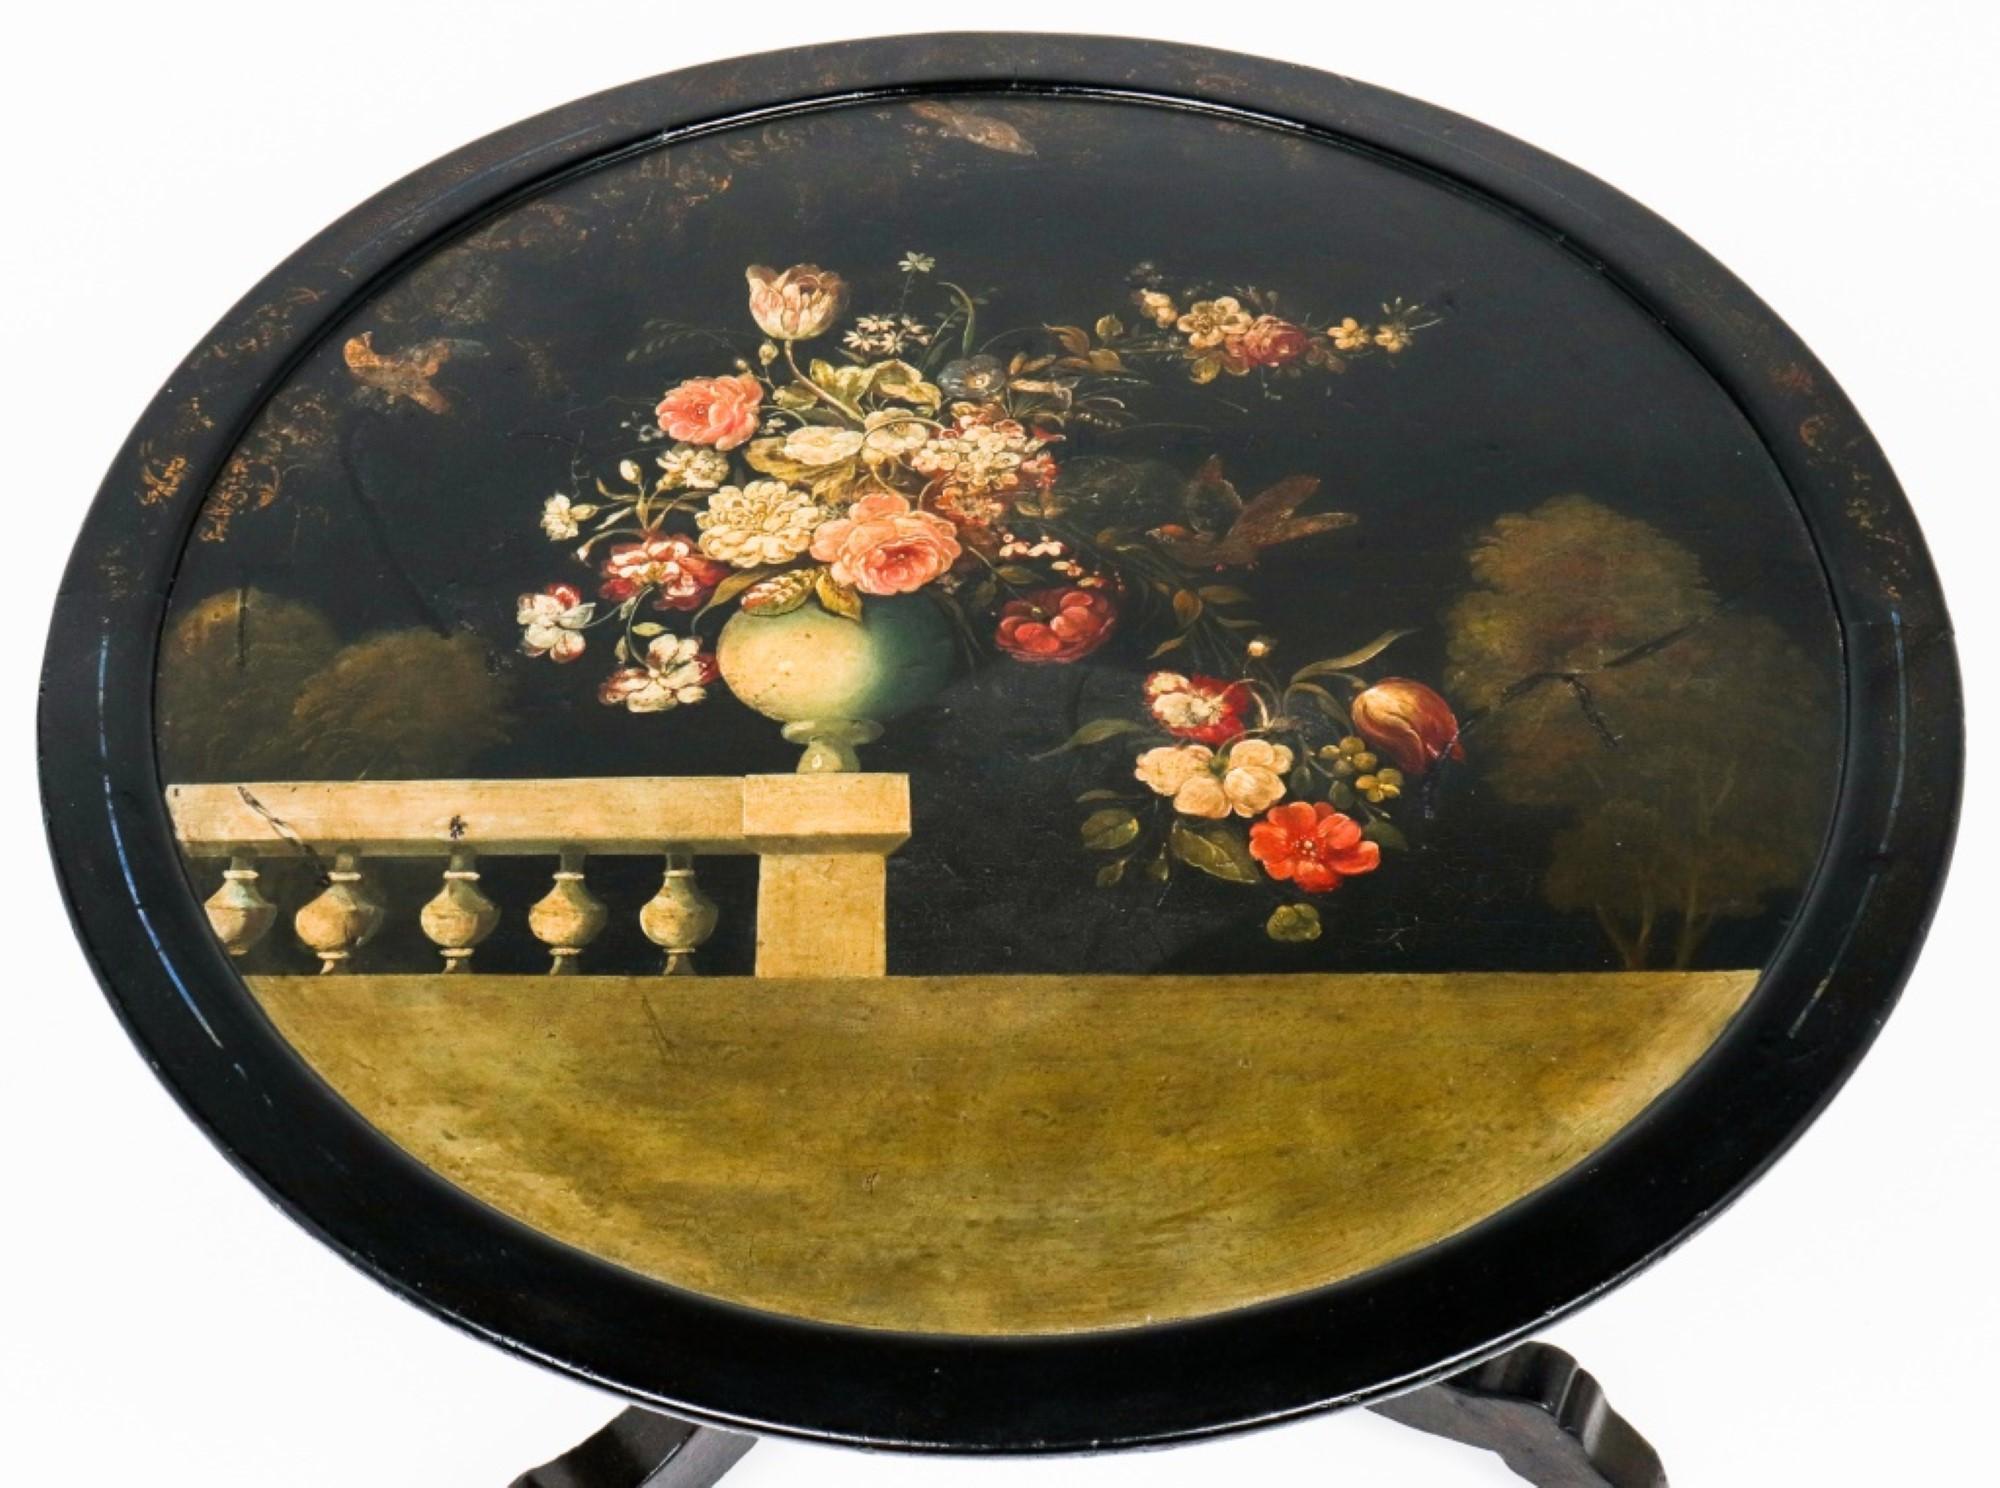 Victorian Style Painted Round Occasional Table. Features: Polychrome painted top with a floral garden scene, gilt accents, turned tripod base. Condition: Surface scratches with restoration.

Dealer: S138XX